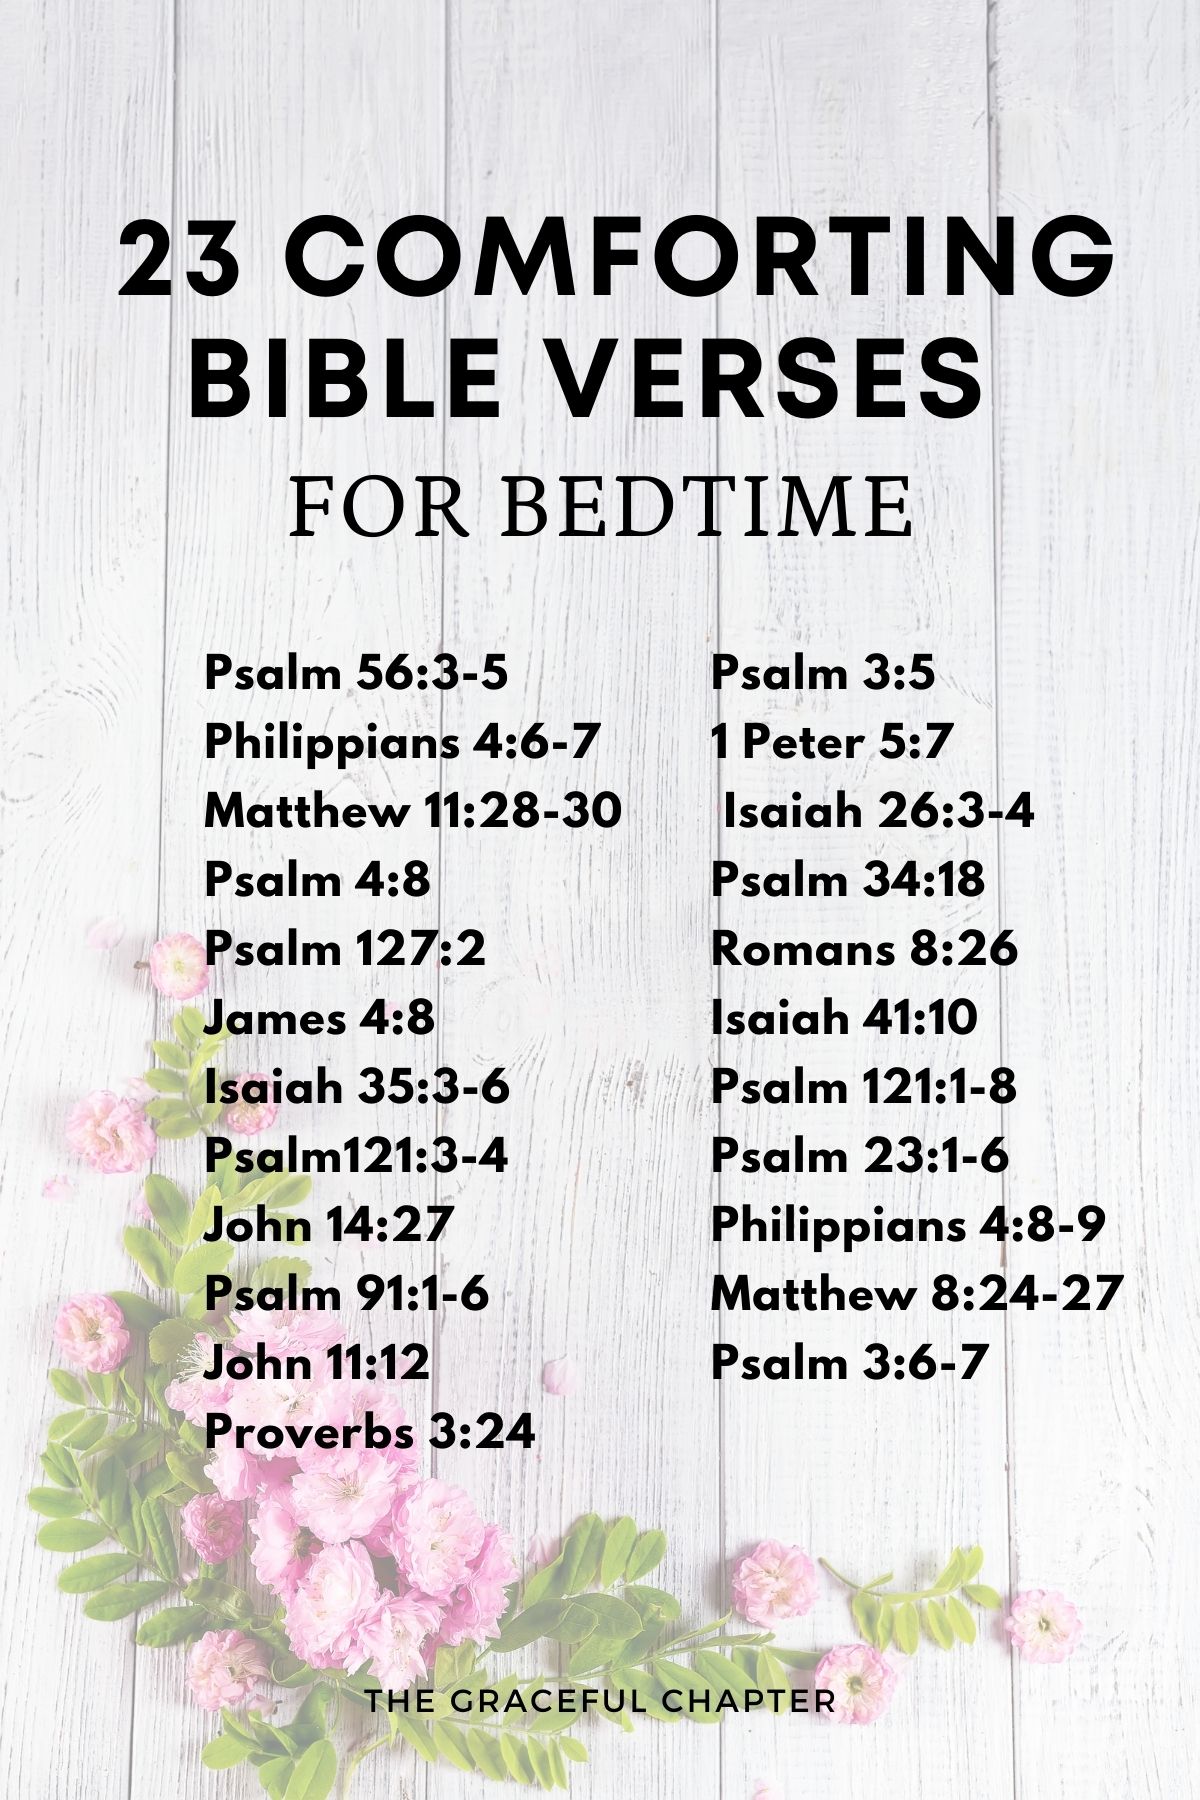 23 comforting bible verses for bedtime